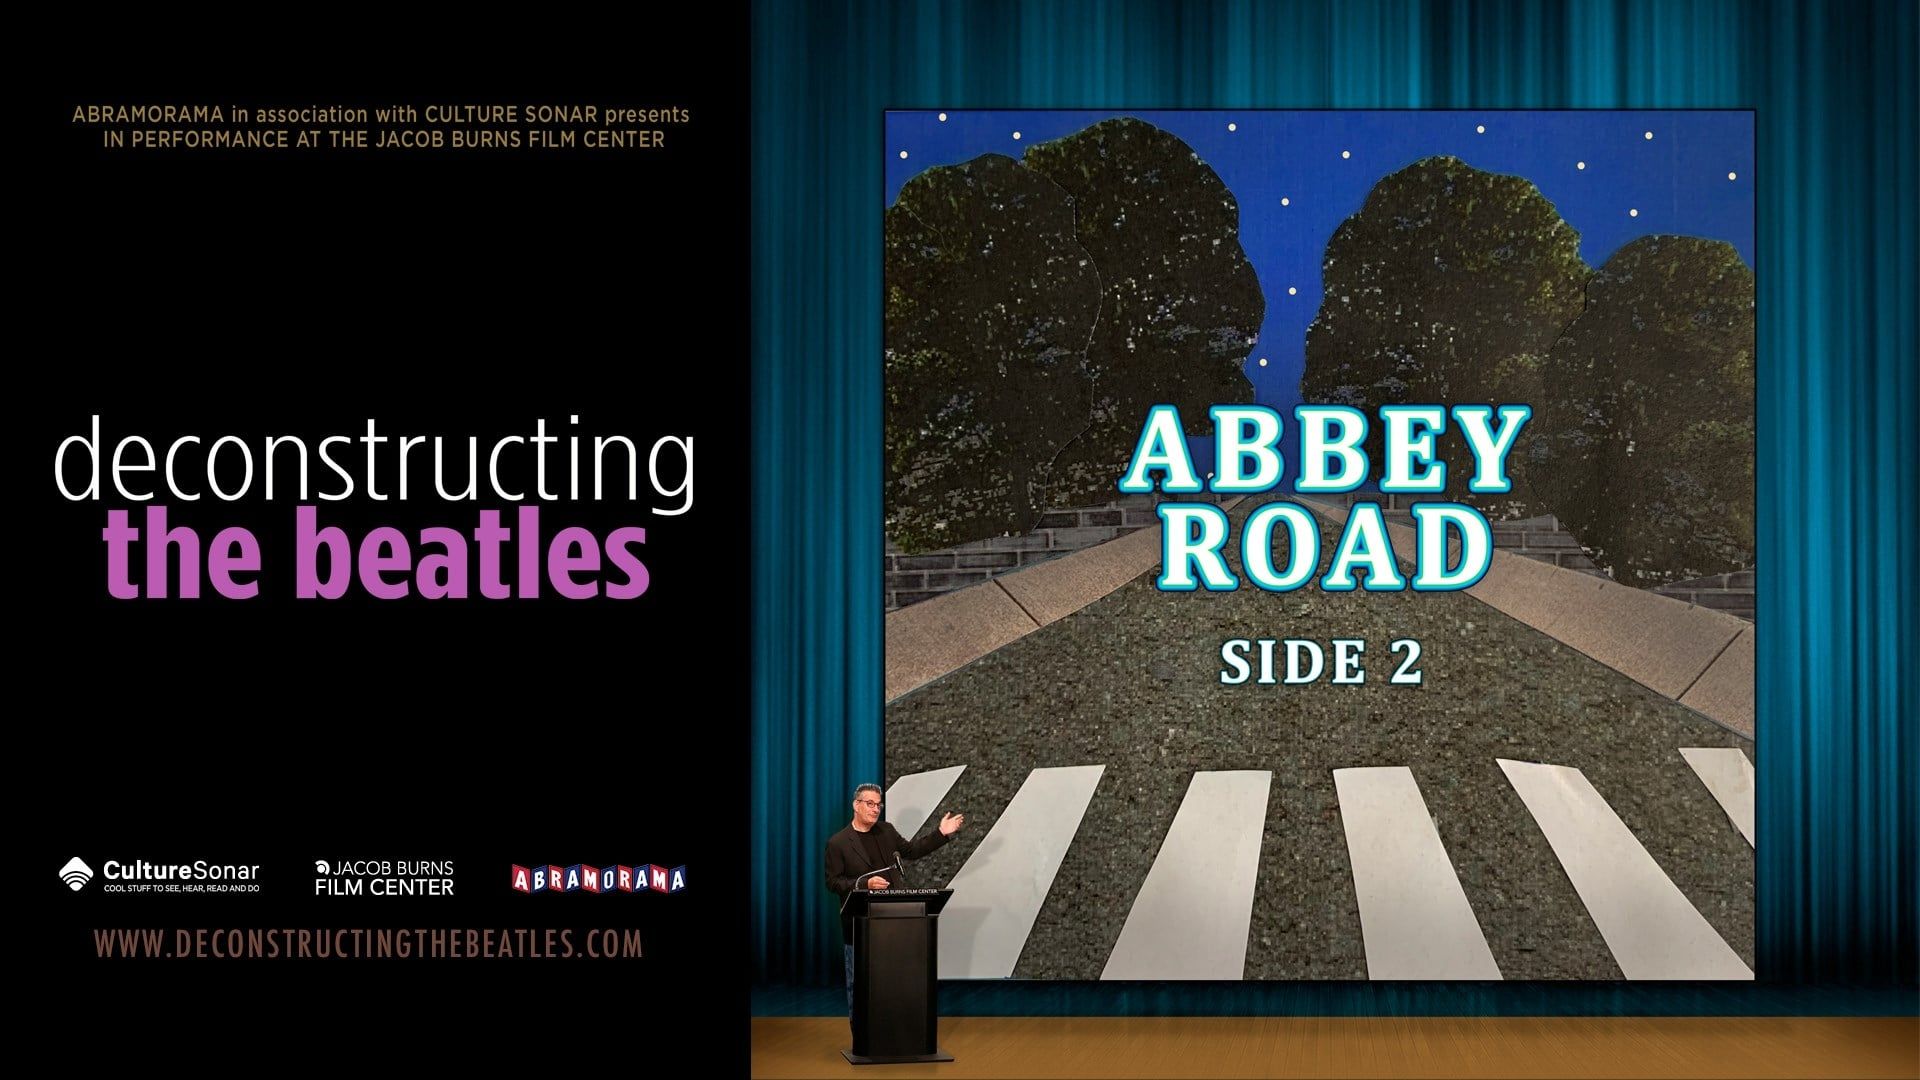 Deconstructing the Beatles' Abbey Road: Side 2 background